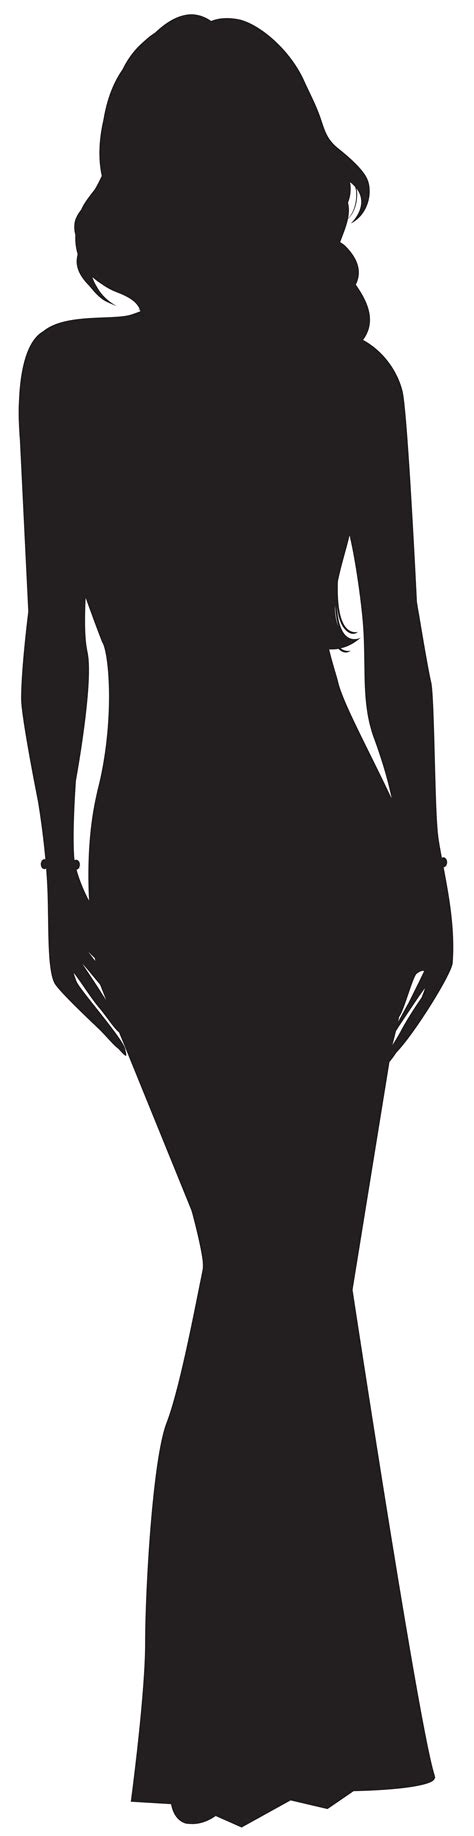 Woman Silhouette Png Clip Art Image Gallery Yopriceville